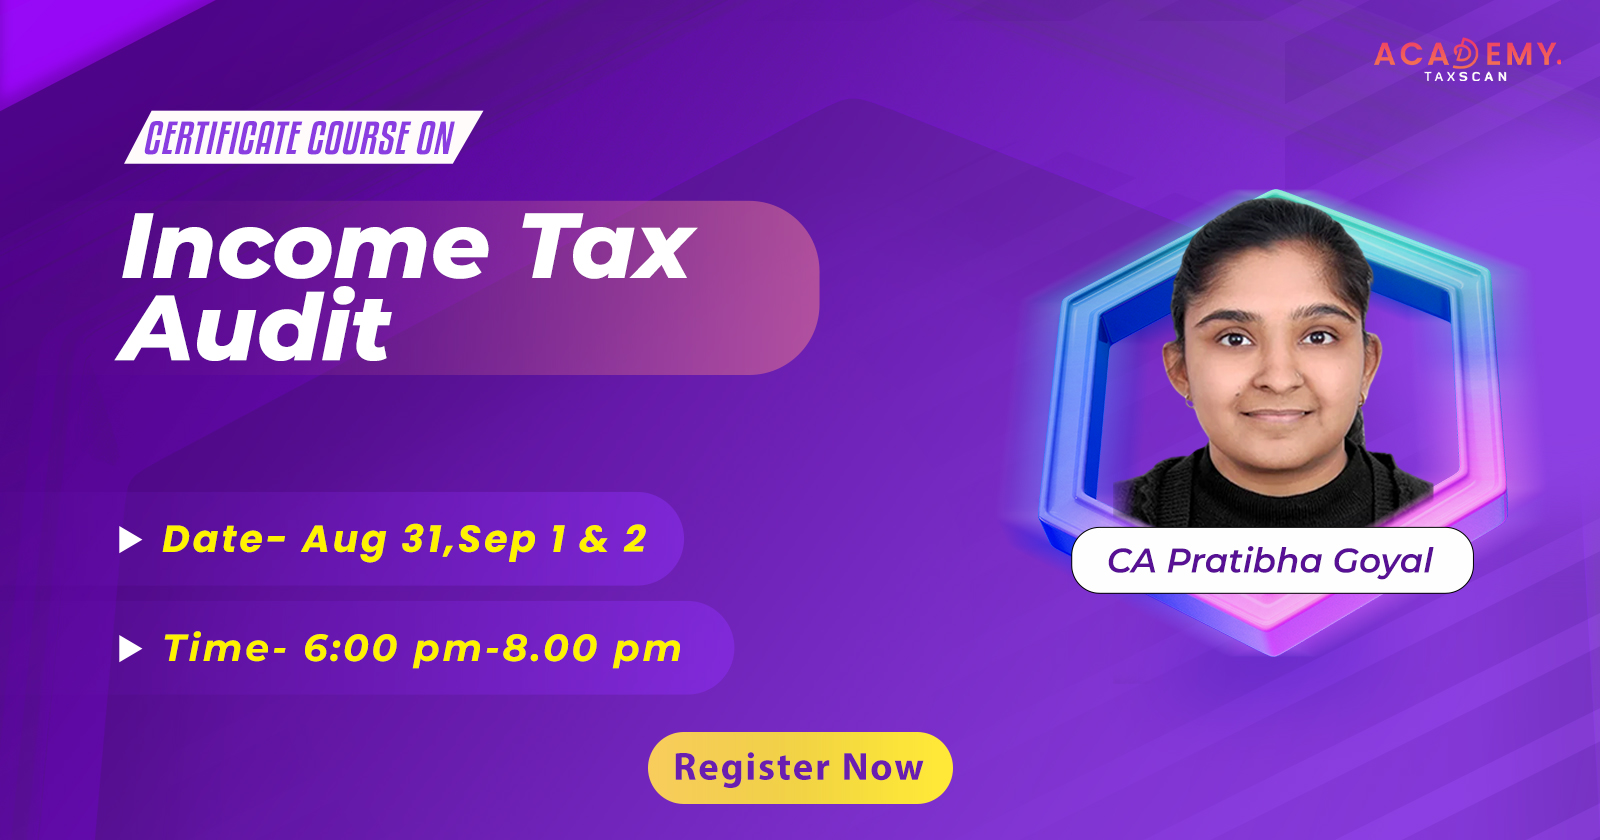 Income Tax Audit - Income Tax Audit - Course on Income Tax Audit - Income Tax Audit course - online certificate course - certificate course - online certificate course 2023  - Taxscan Academy